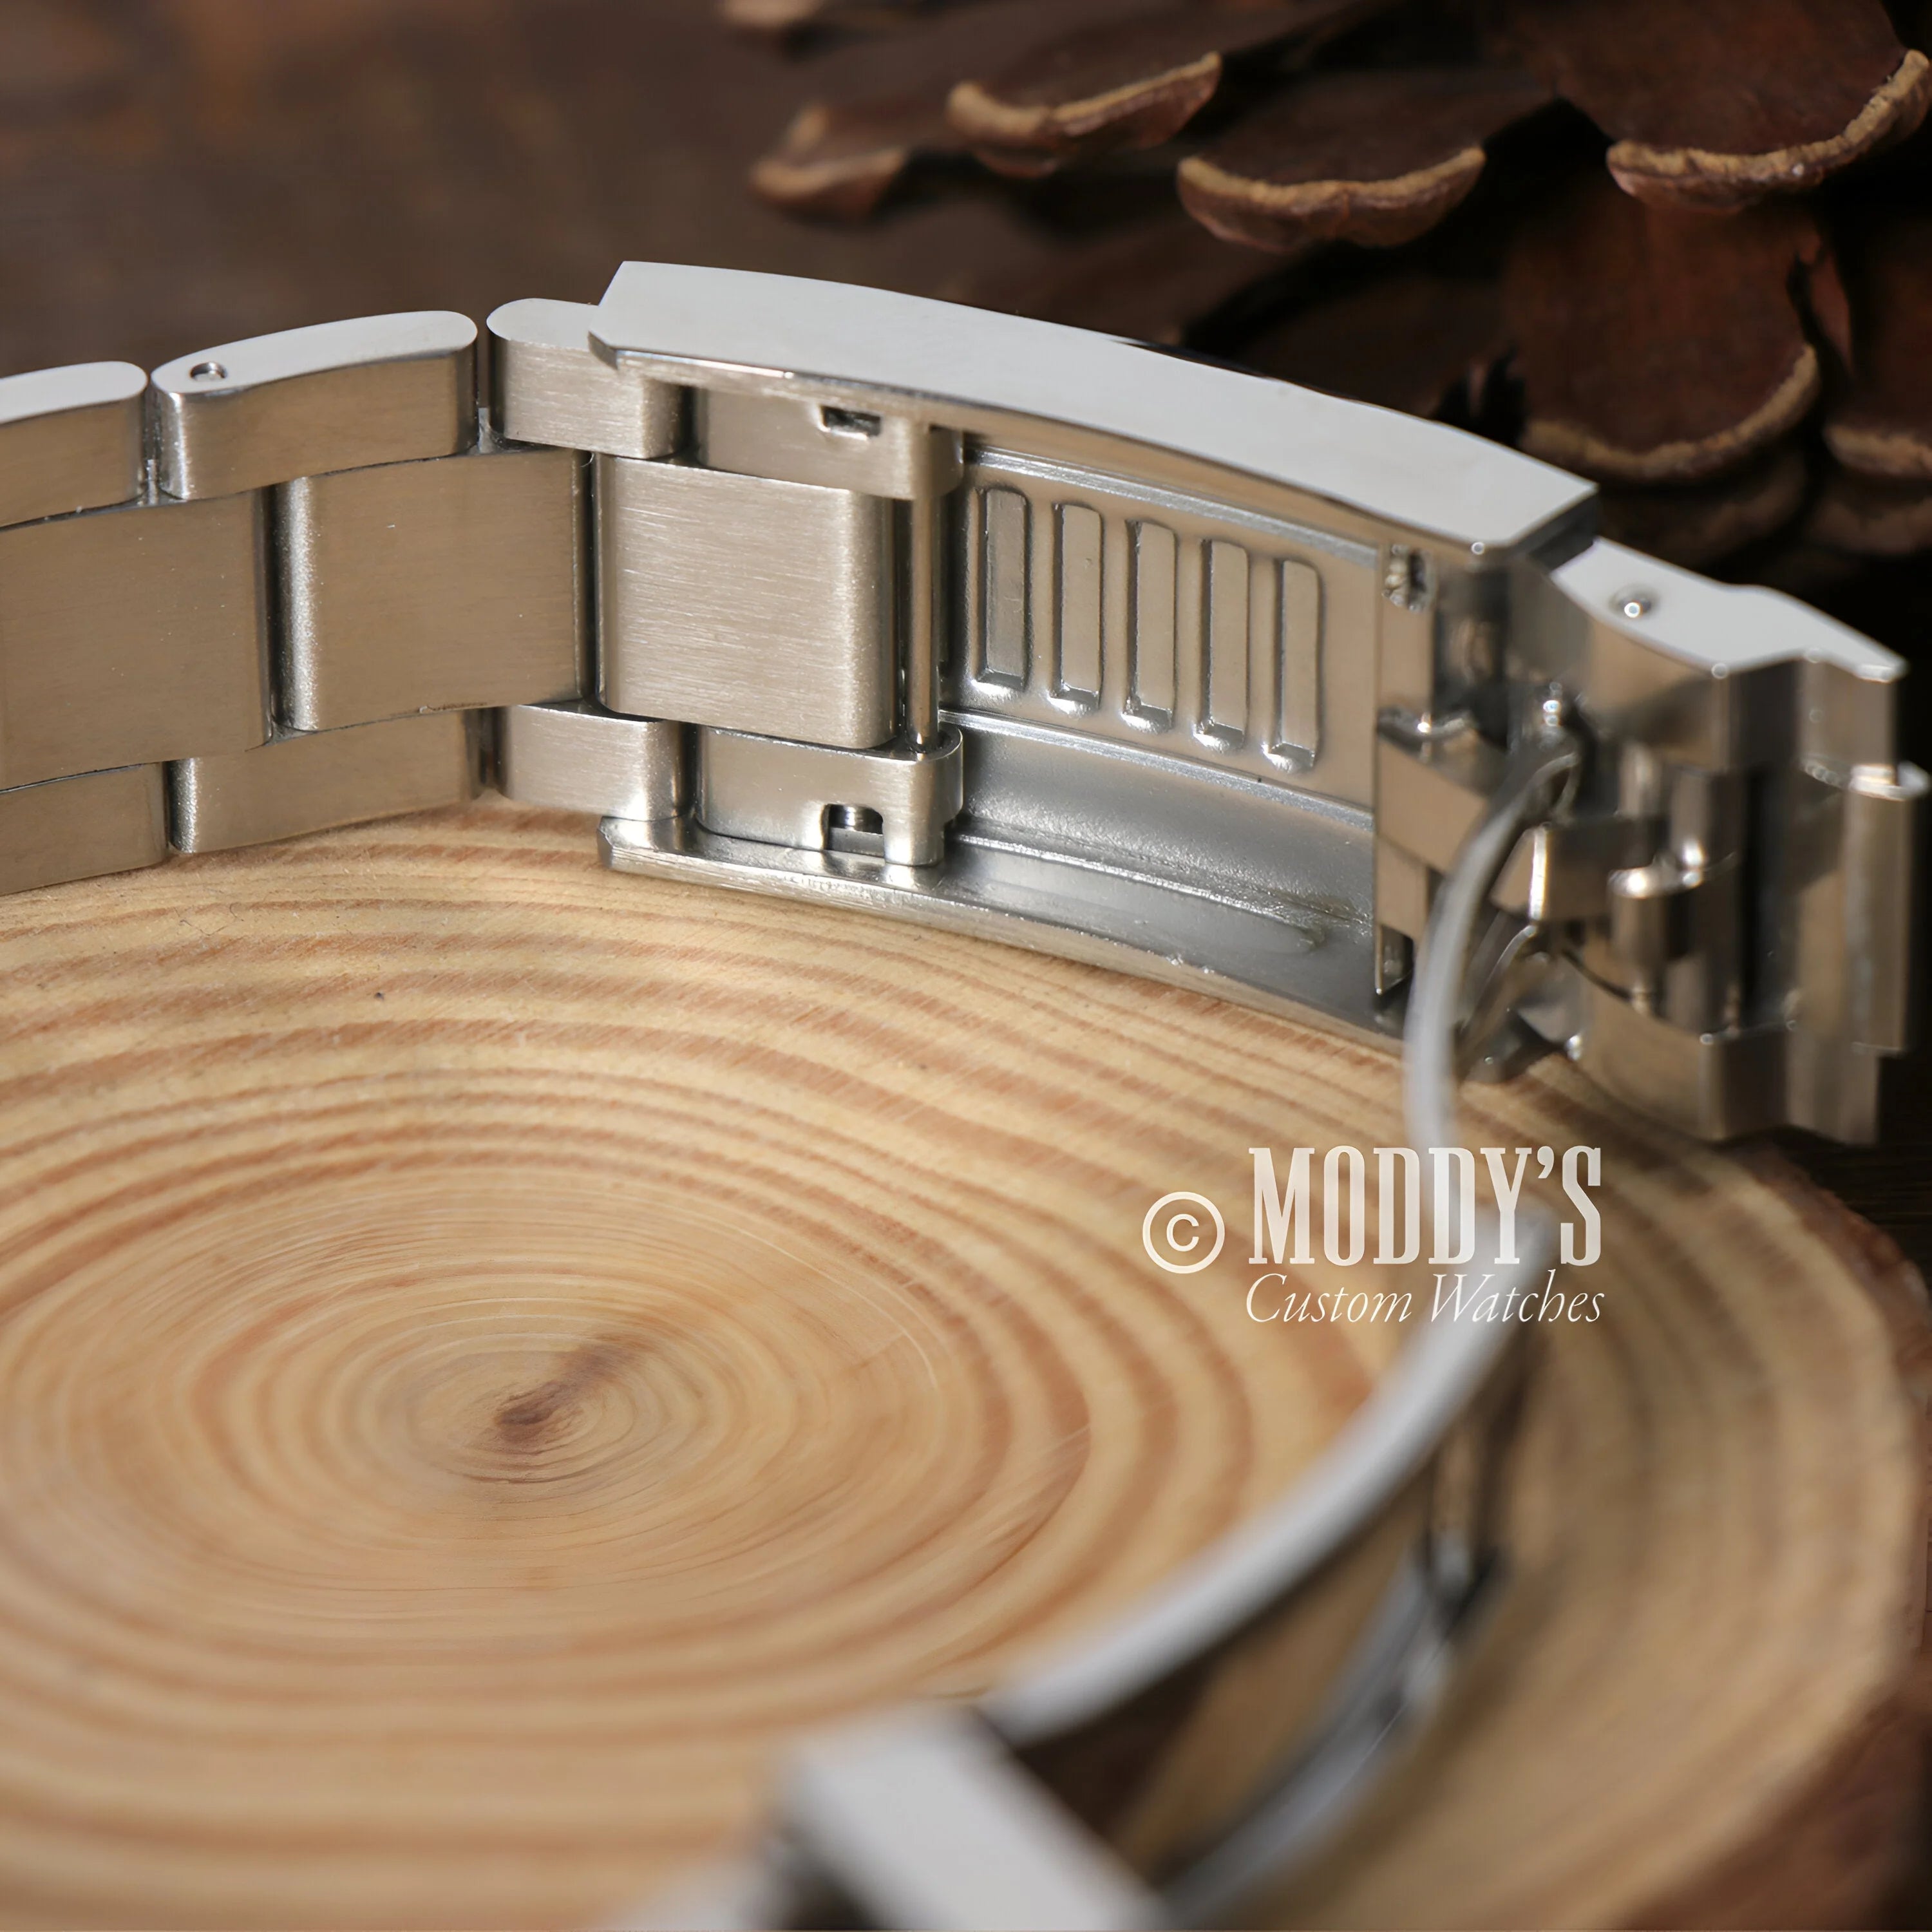 Seikomarine Silver: Metal Watch Bracelet With Clasp On Wood - Perfect For Seiko Mod Lovers